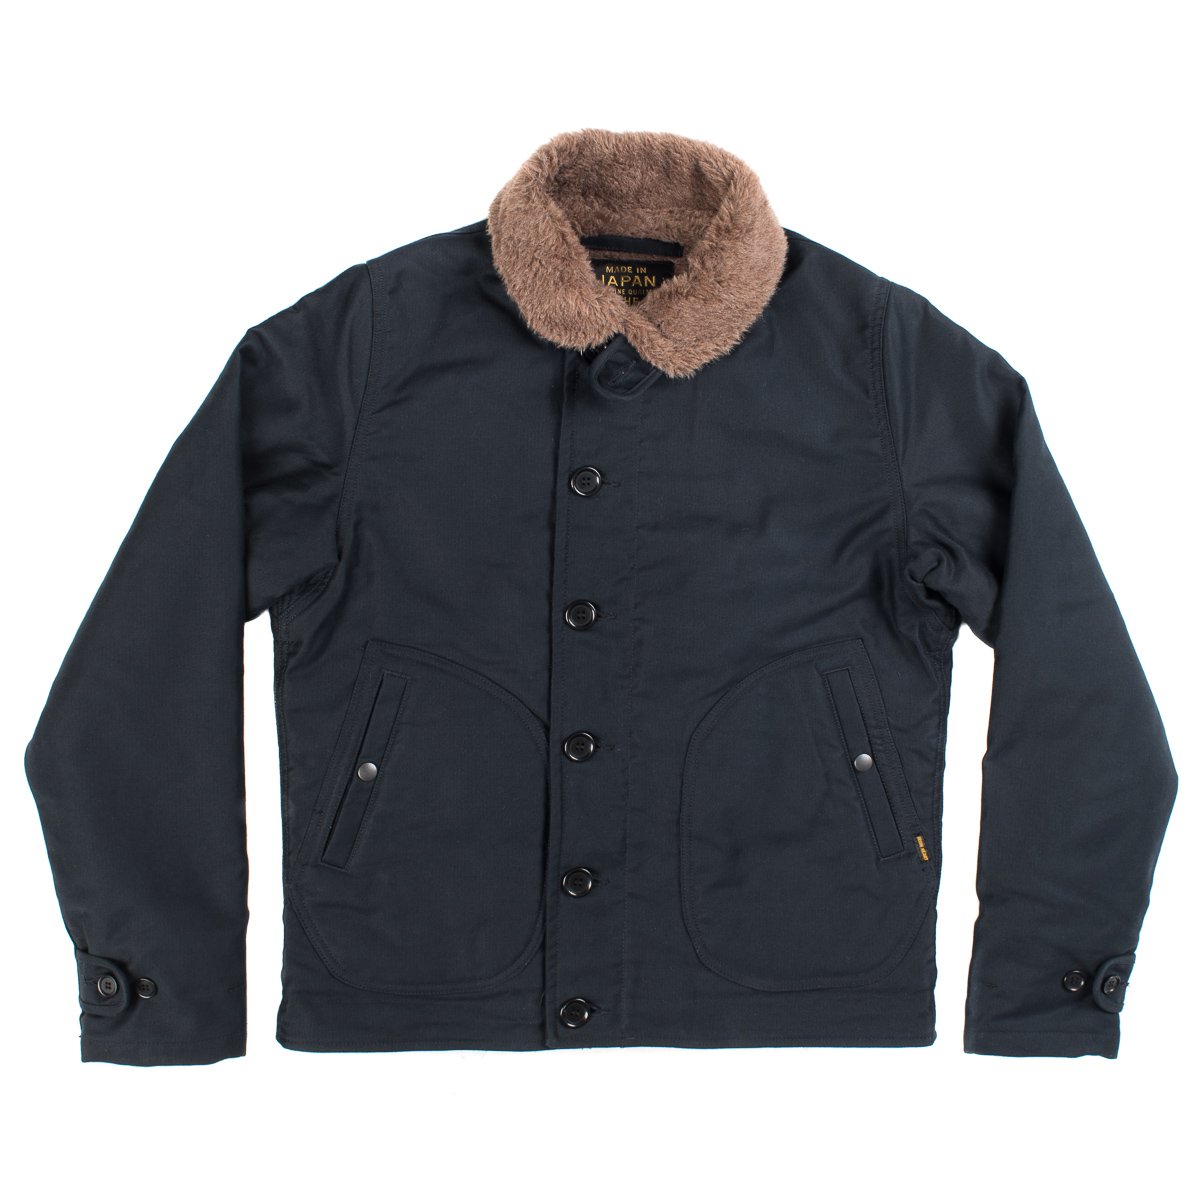 IHM-29-NVY | Iron Heart Whipcord N1 Deck Jacket - Navy